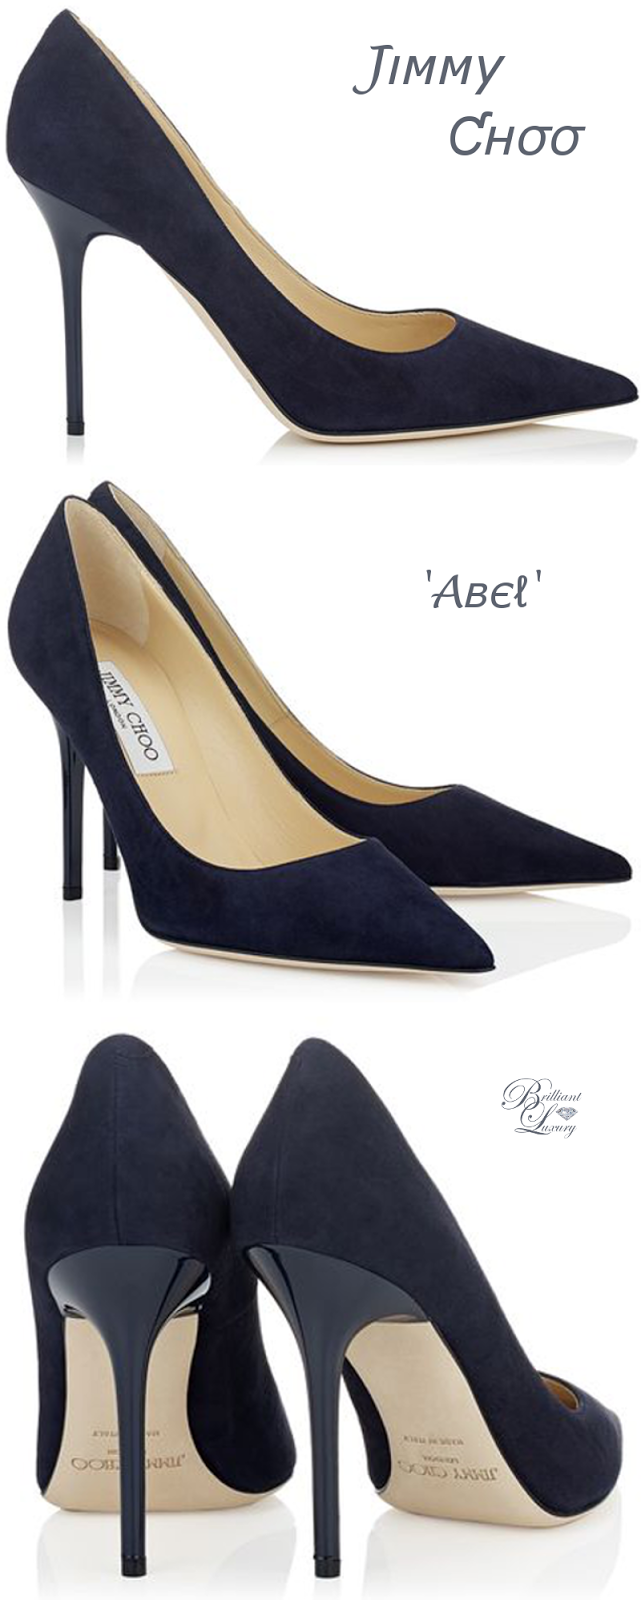 Brilliant Luxury: ♦JIMMY CHOO 'Abel' Collection